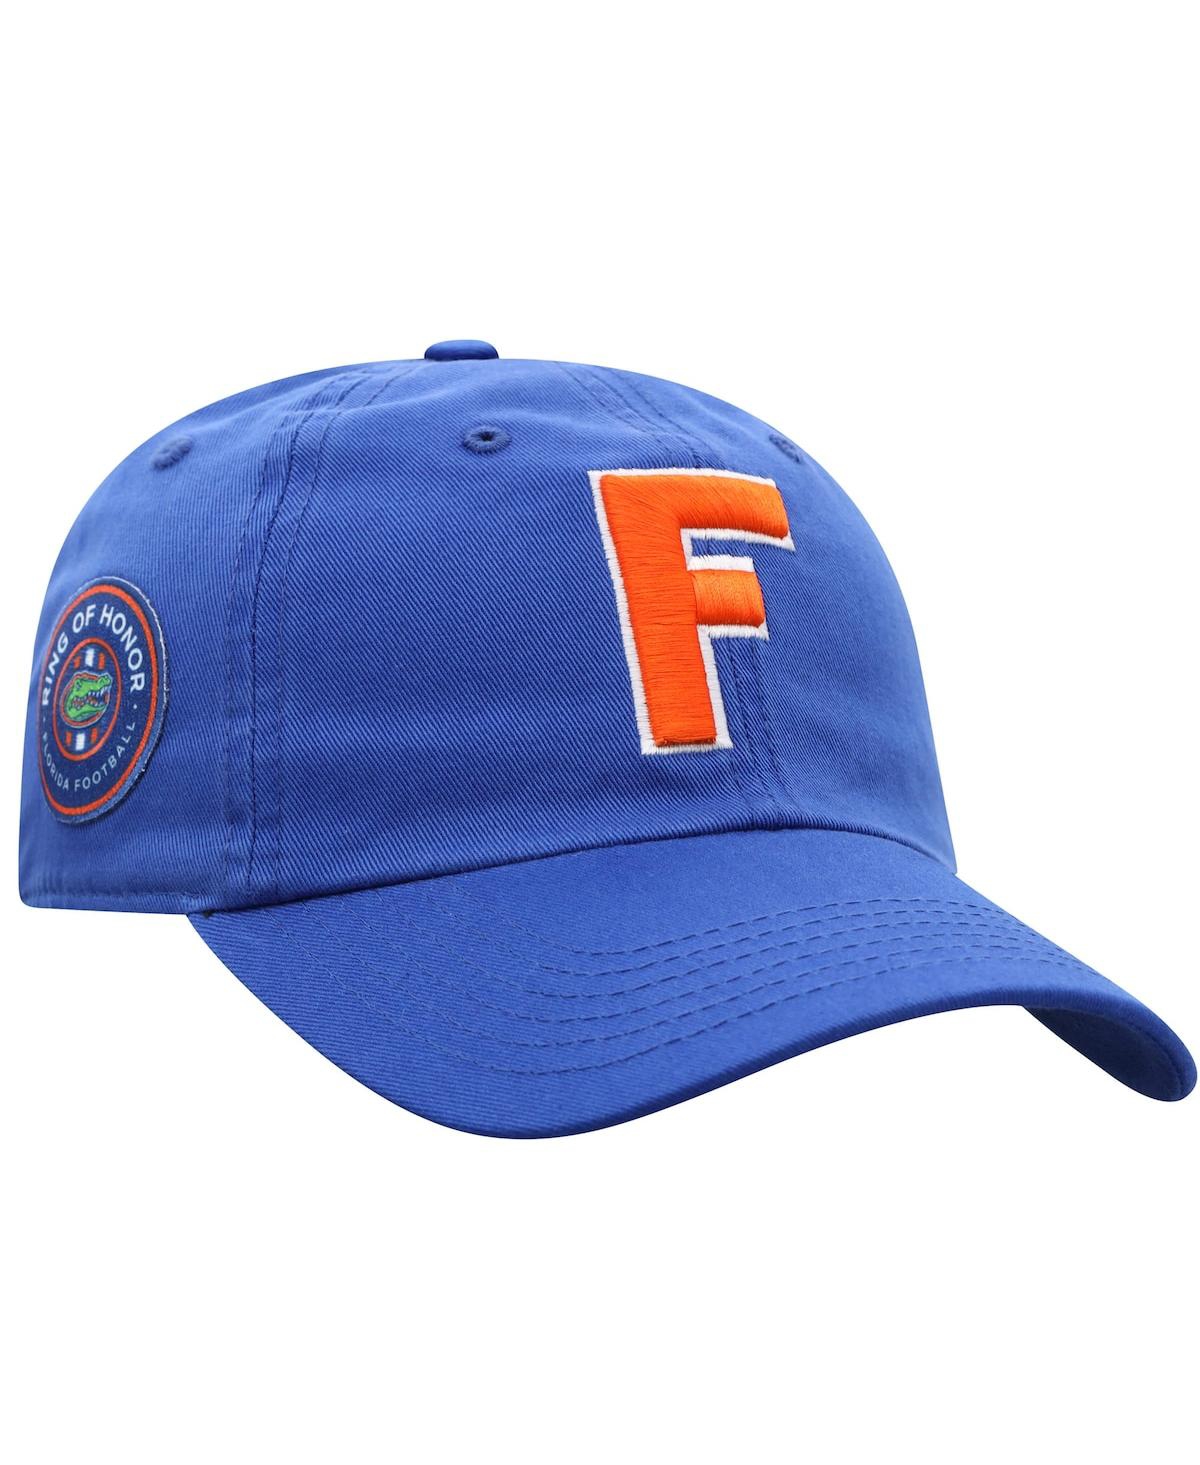 TOP OF THE WORLD MEN'S TOP OF THE WORLD JACK YOUNGBLOOD ROYAL FLORIDA GATORS RING OF HONOR ADJUSTABLE HAT